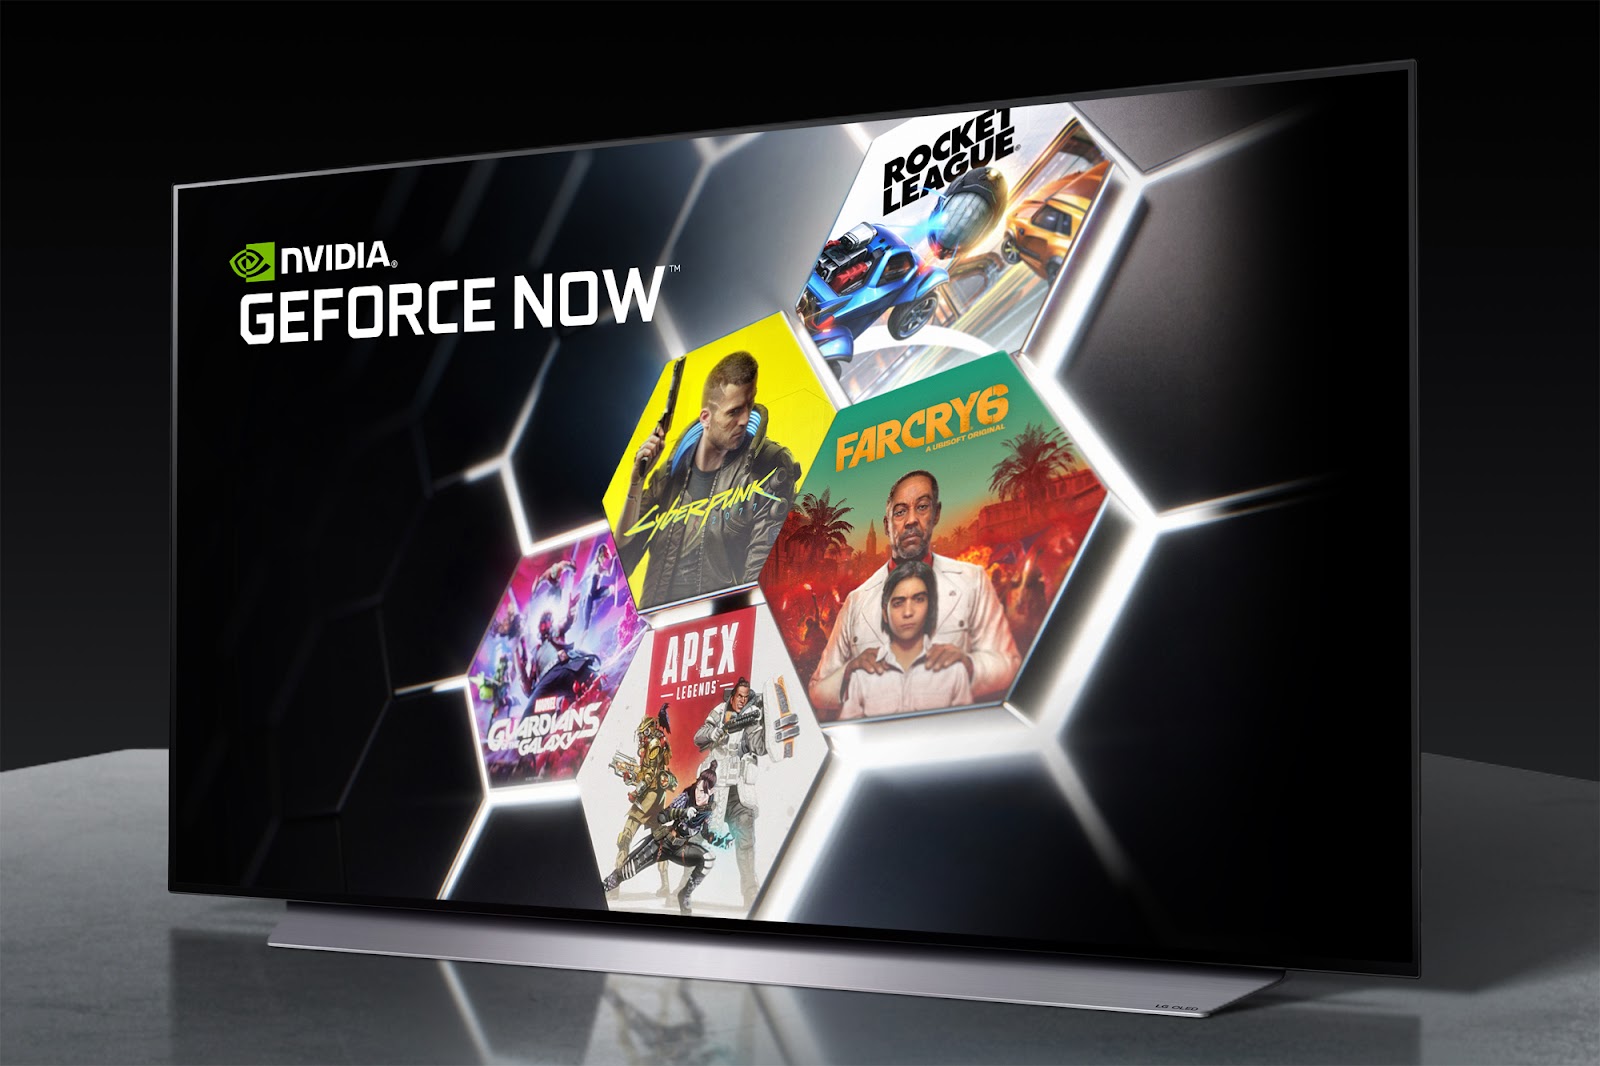 LG TV with Nvidia G-Force Now 